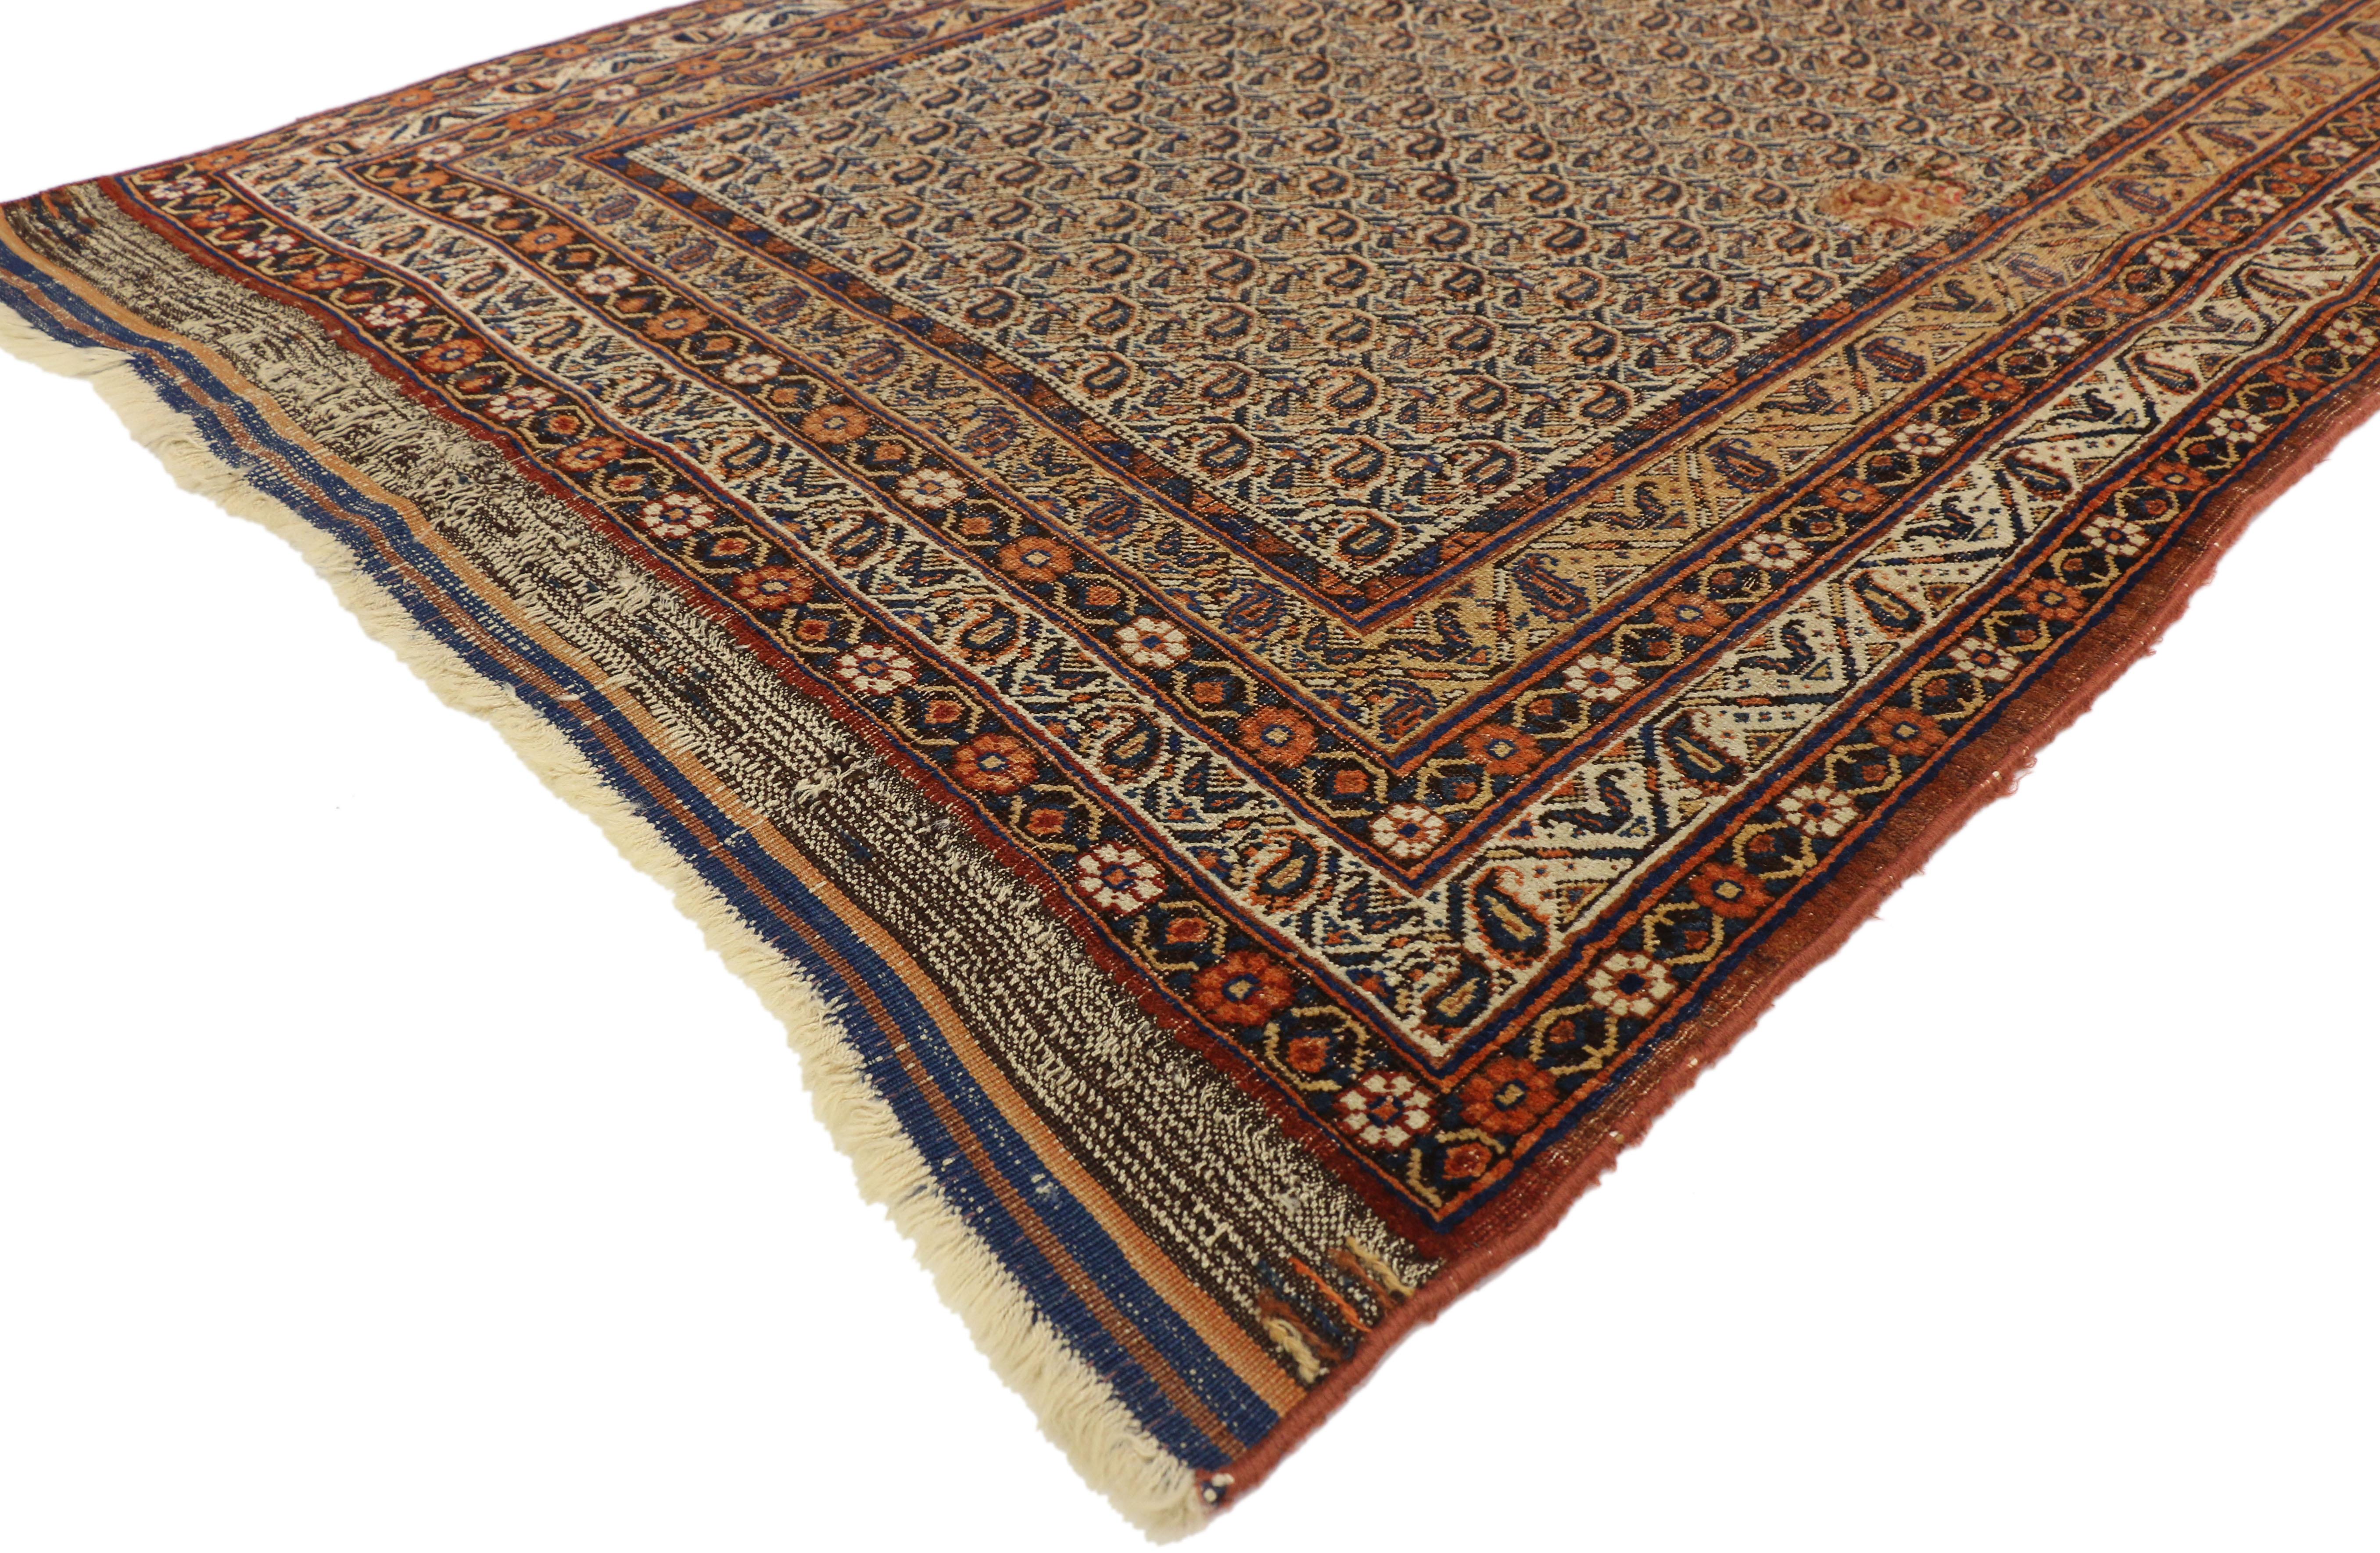 74395 Distressed Antique Persian Bijar Accent Rug with Rustic Craftsman Style 04'04 x 06'04. This hand knotted wool distressed antique Persian Bijar Accent rug feature an all-over the boteh pattern spread across the field, enhancing the depth that